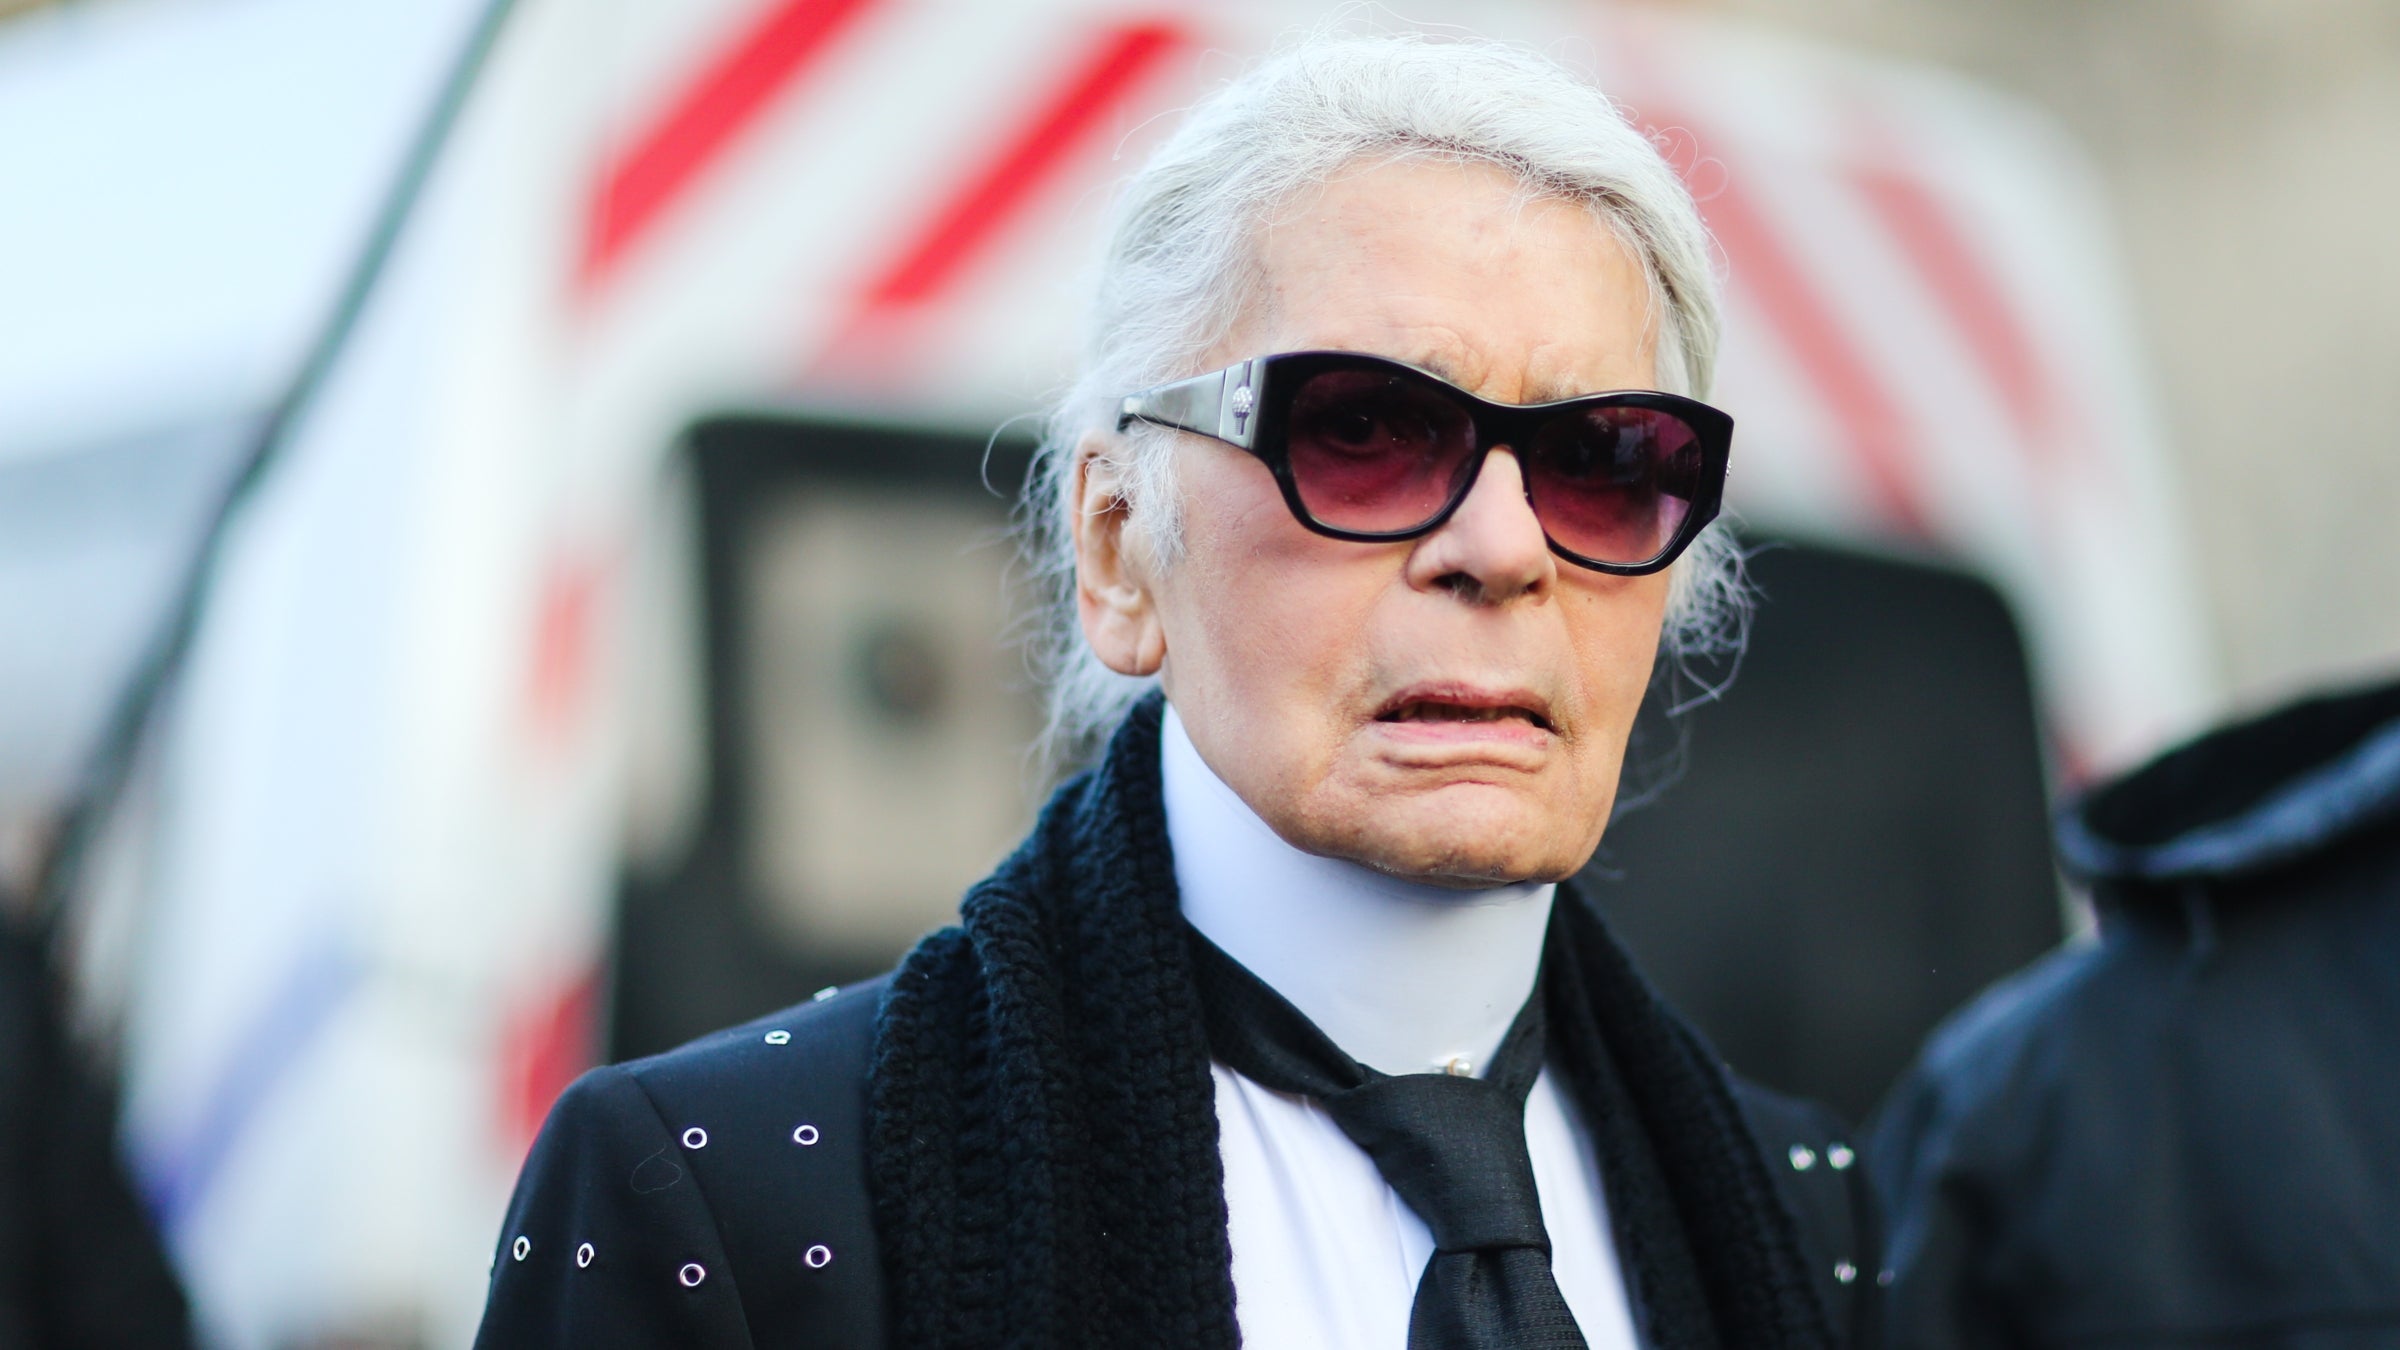 Karl Lagerfeld’s Most Outrageous Outdoor Gear Designs